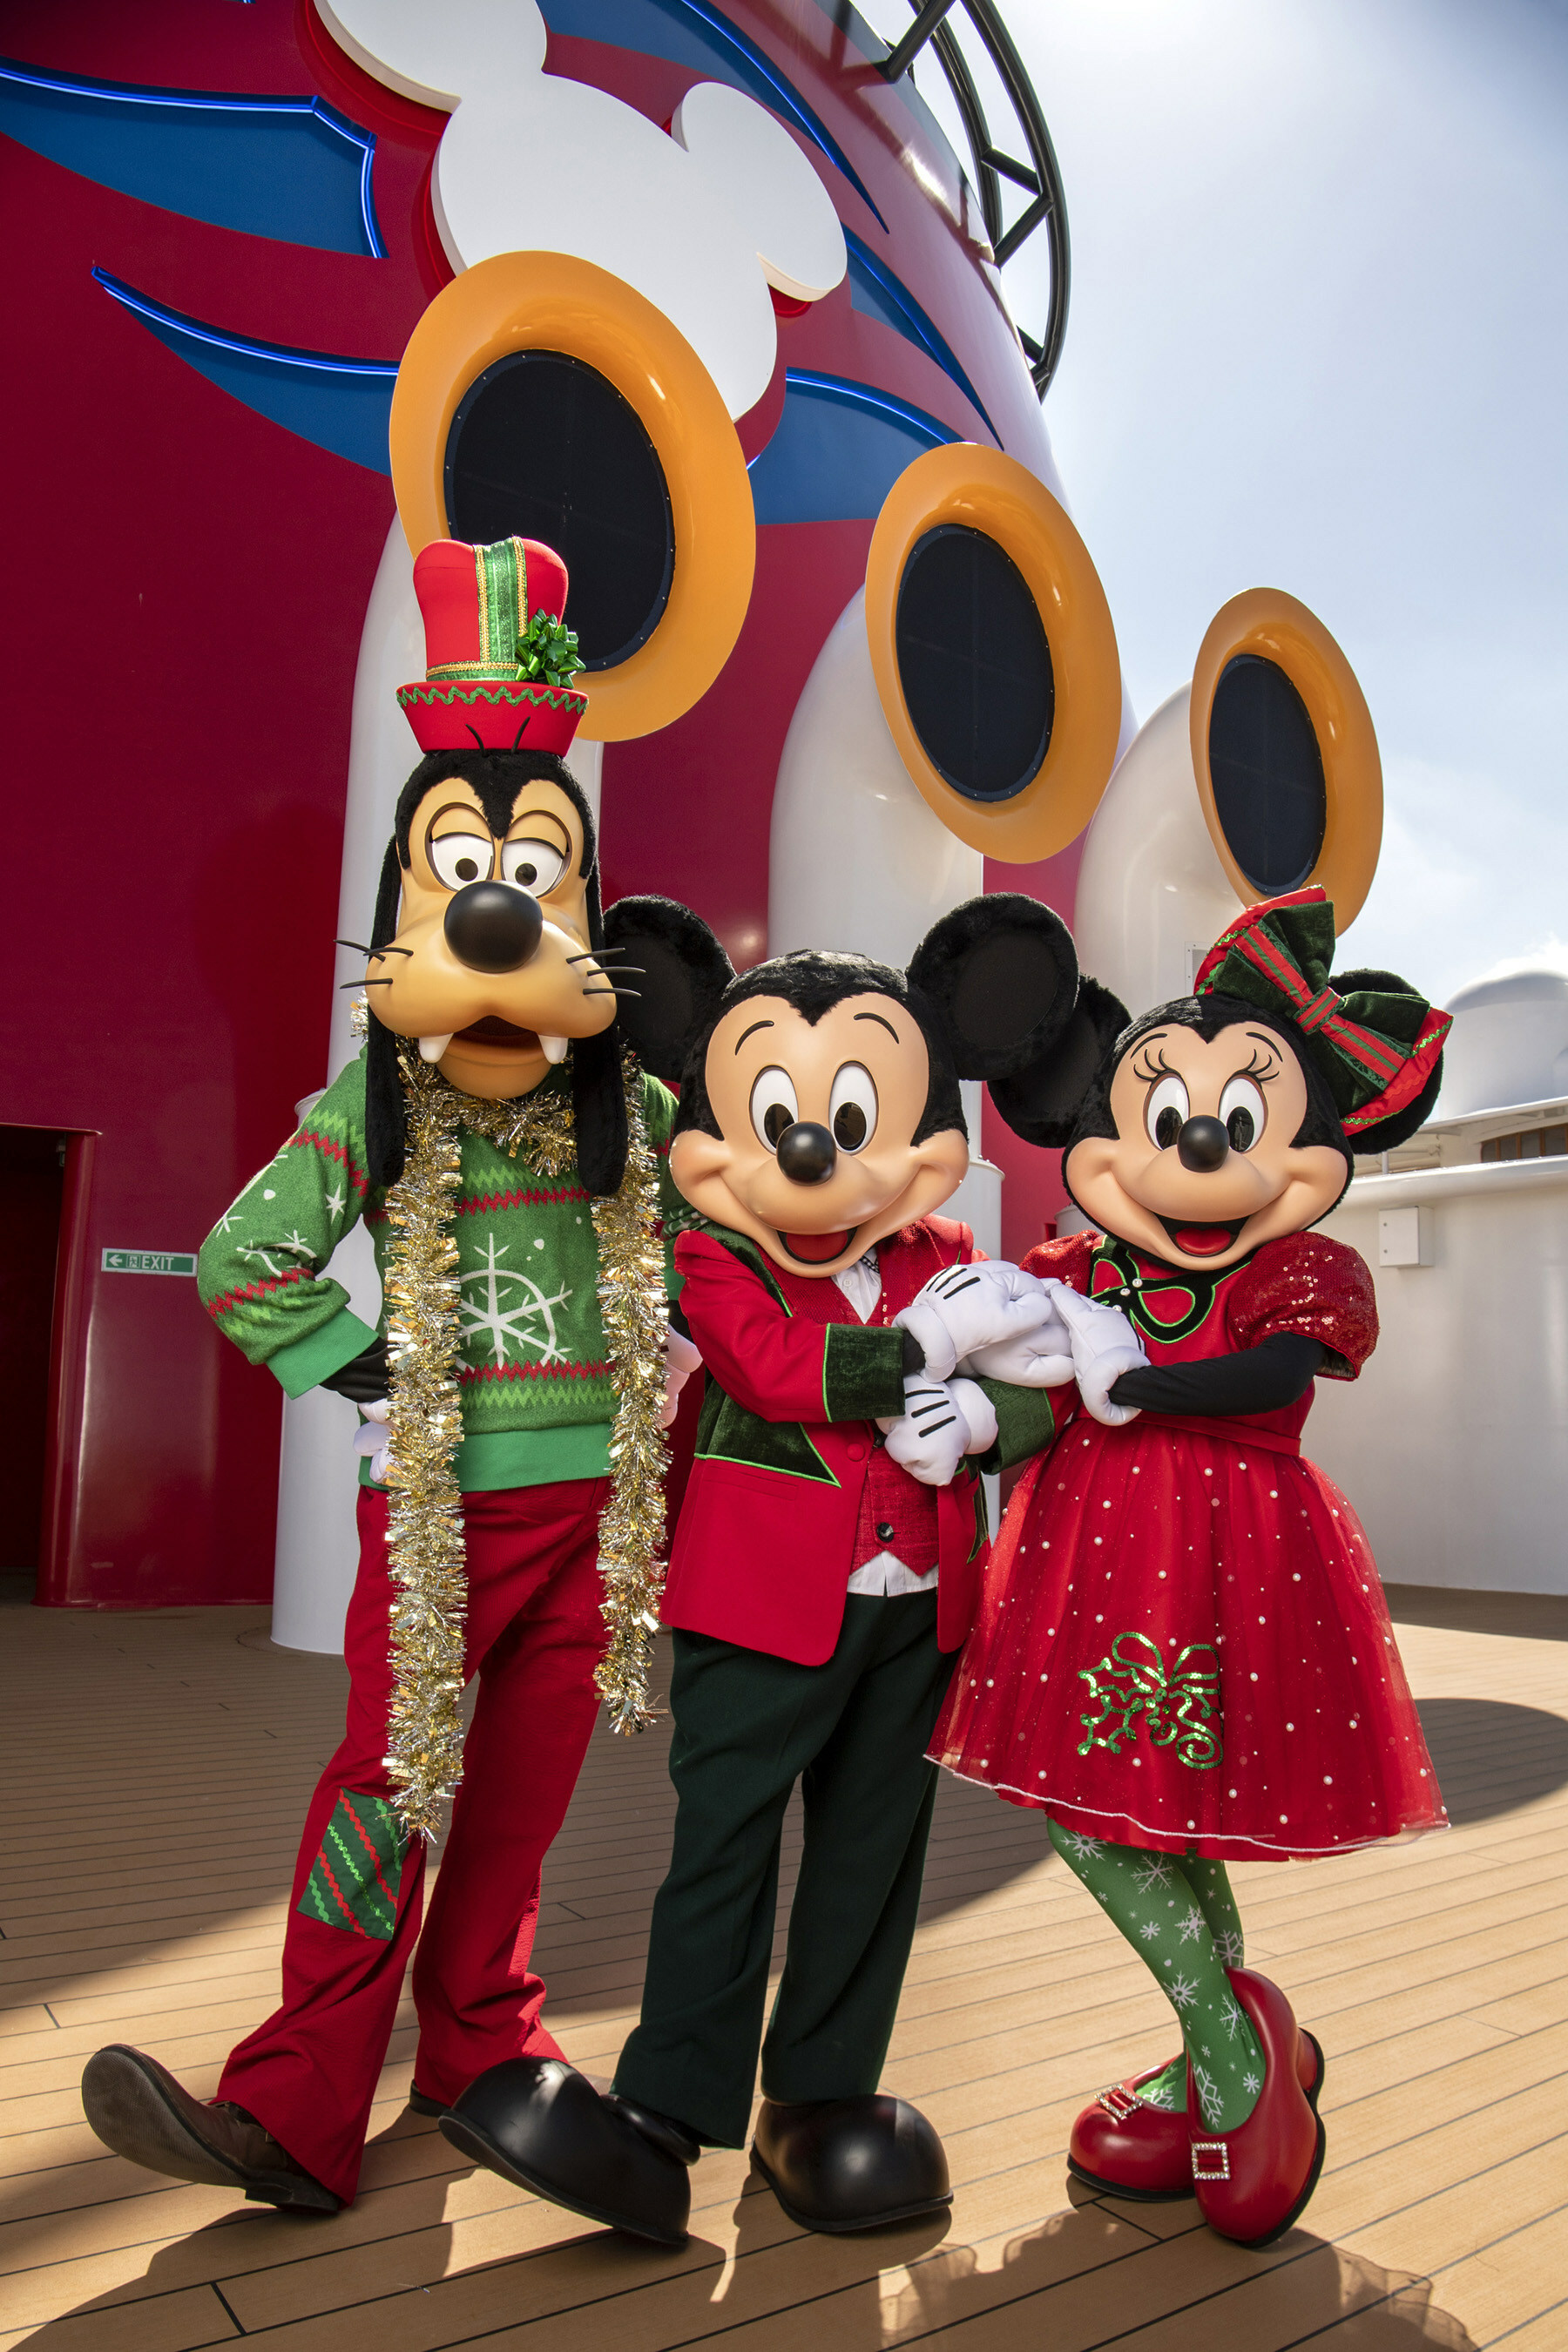 Spooky Fun and Merry Magic Await Disney Cruise Line Guests on Halloween and Holiday Cruises in Fall 2024 - During Very Merrytime cruises, holiday magic will be unwrapped for the whole family with joyful holiday décor; favorite characters in their finest festive attire; themed activities that are merry and bright; and celebrations on deck that are full of holiday spirit. (Kent Phillips, photographer) (Image at LateCruiseNews.com - June 2023)